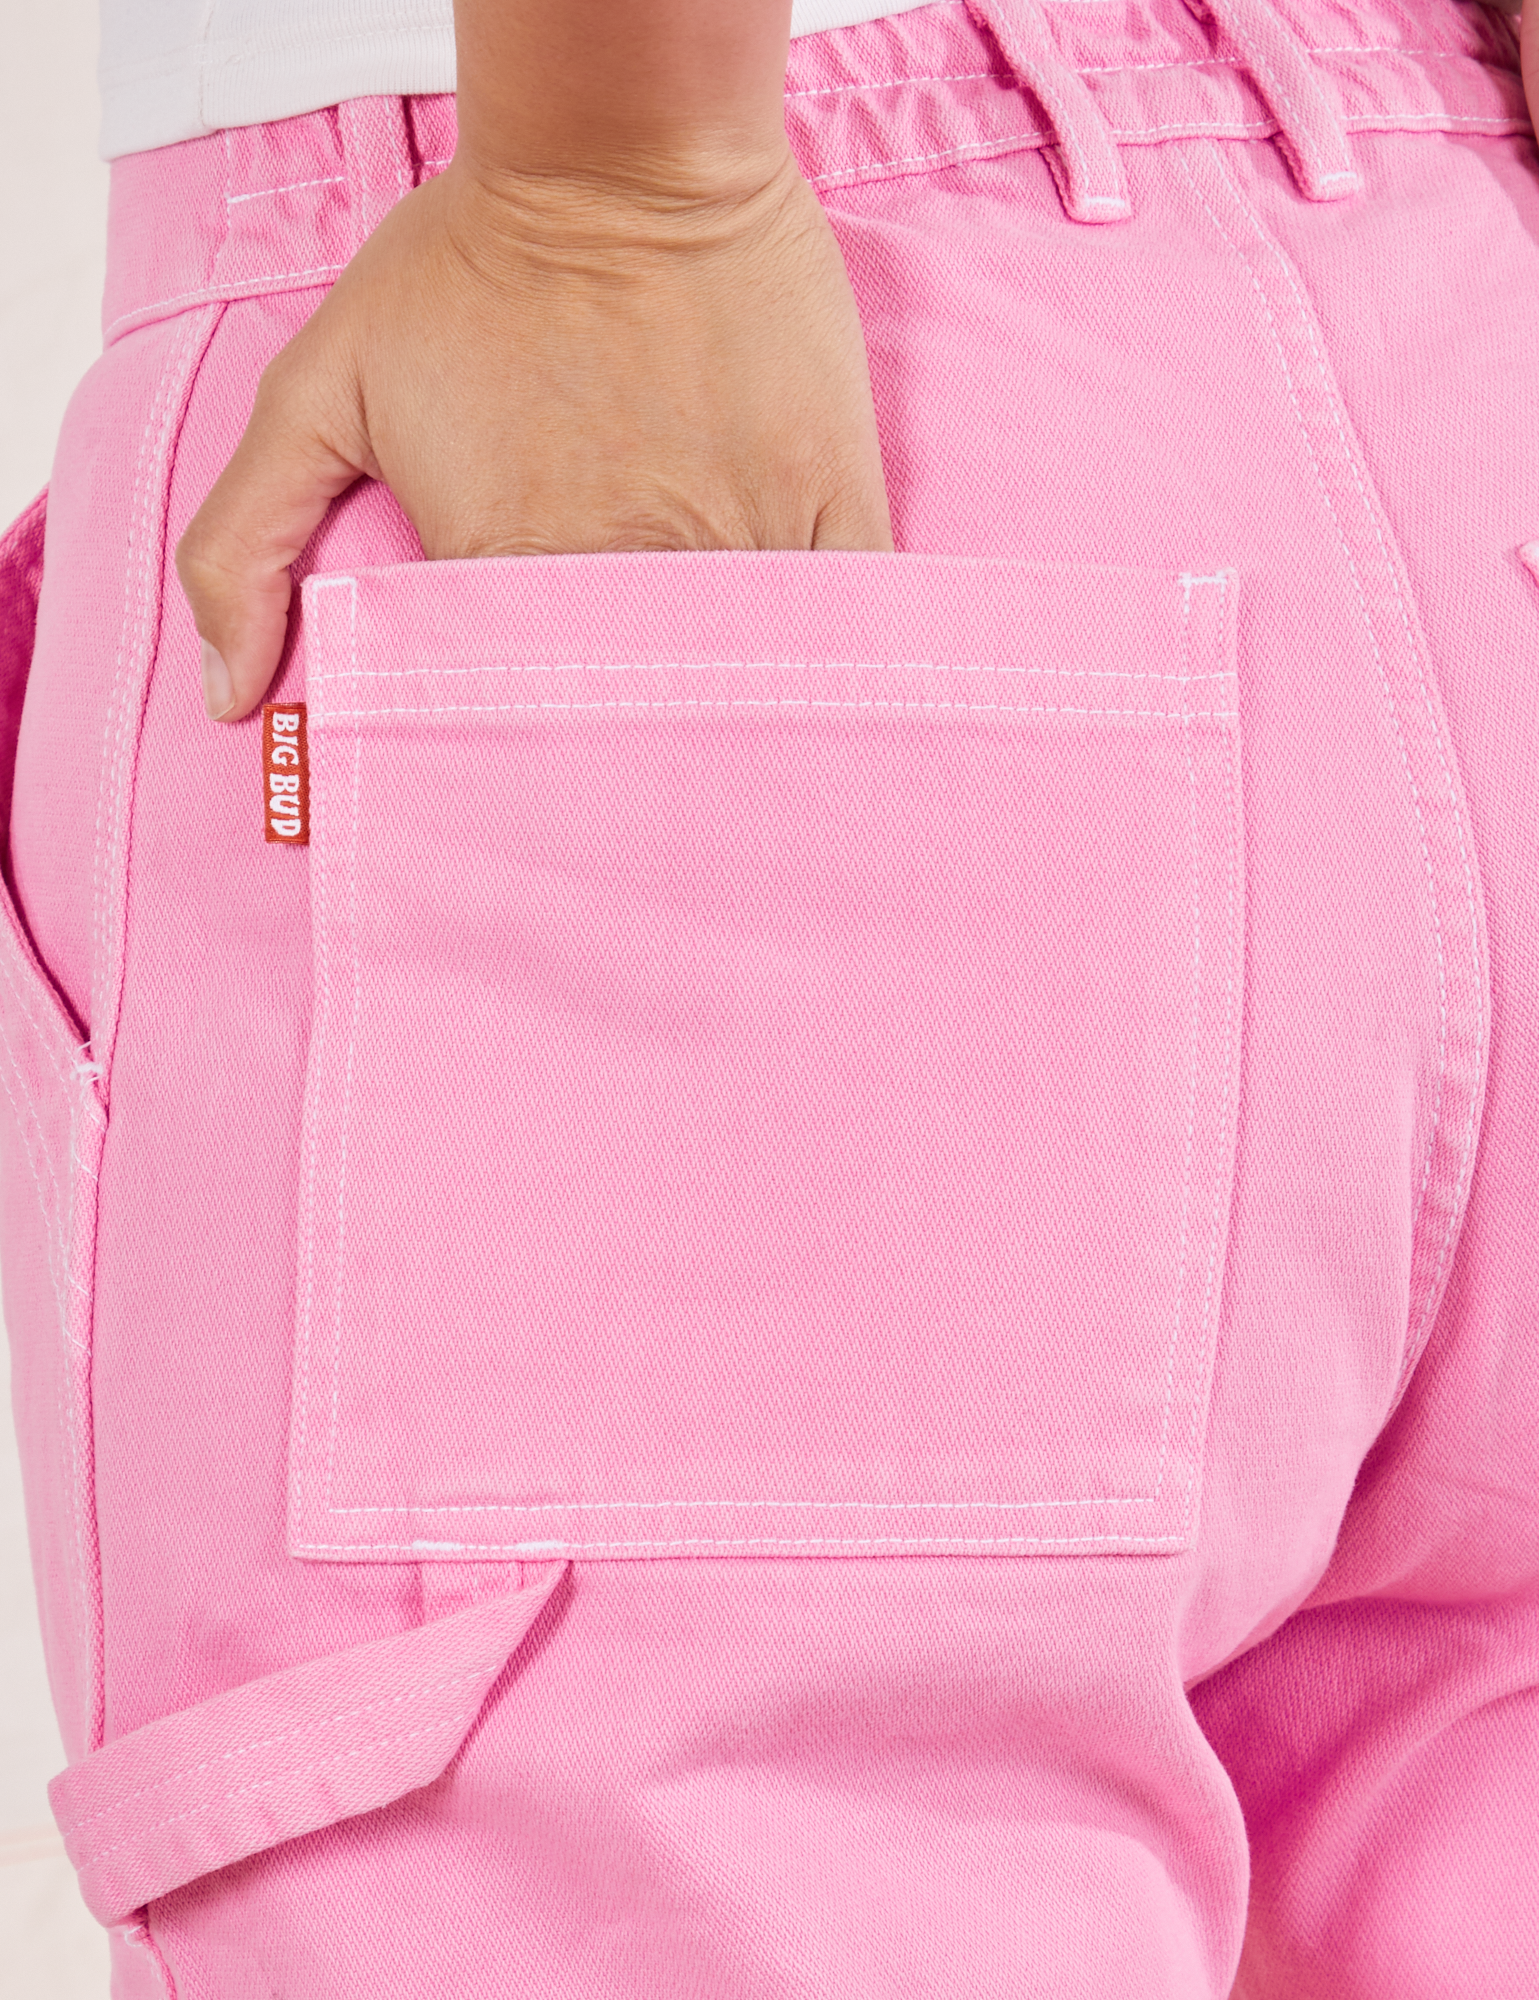 Carpenter Jeans in Bubblegum Pink back pocket close up. Tiara has her hand in the pocket.